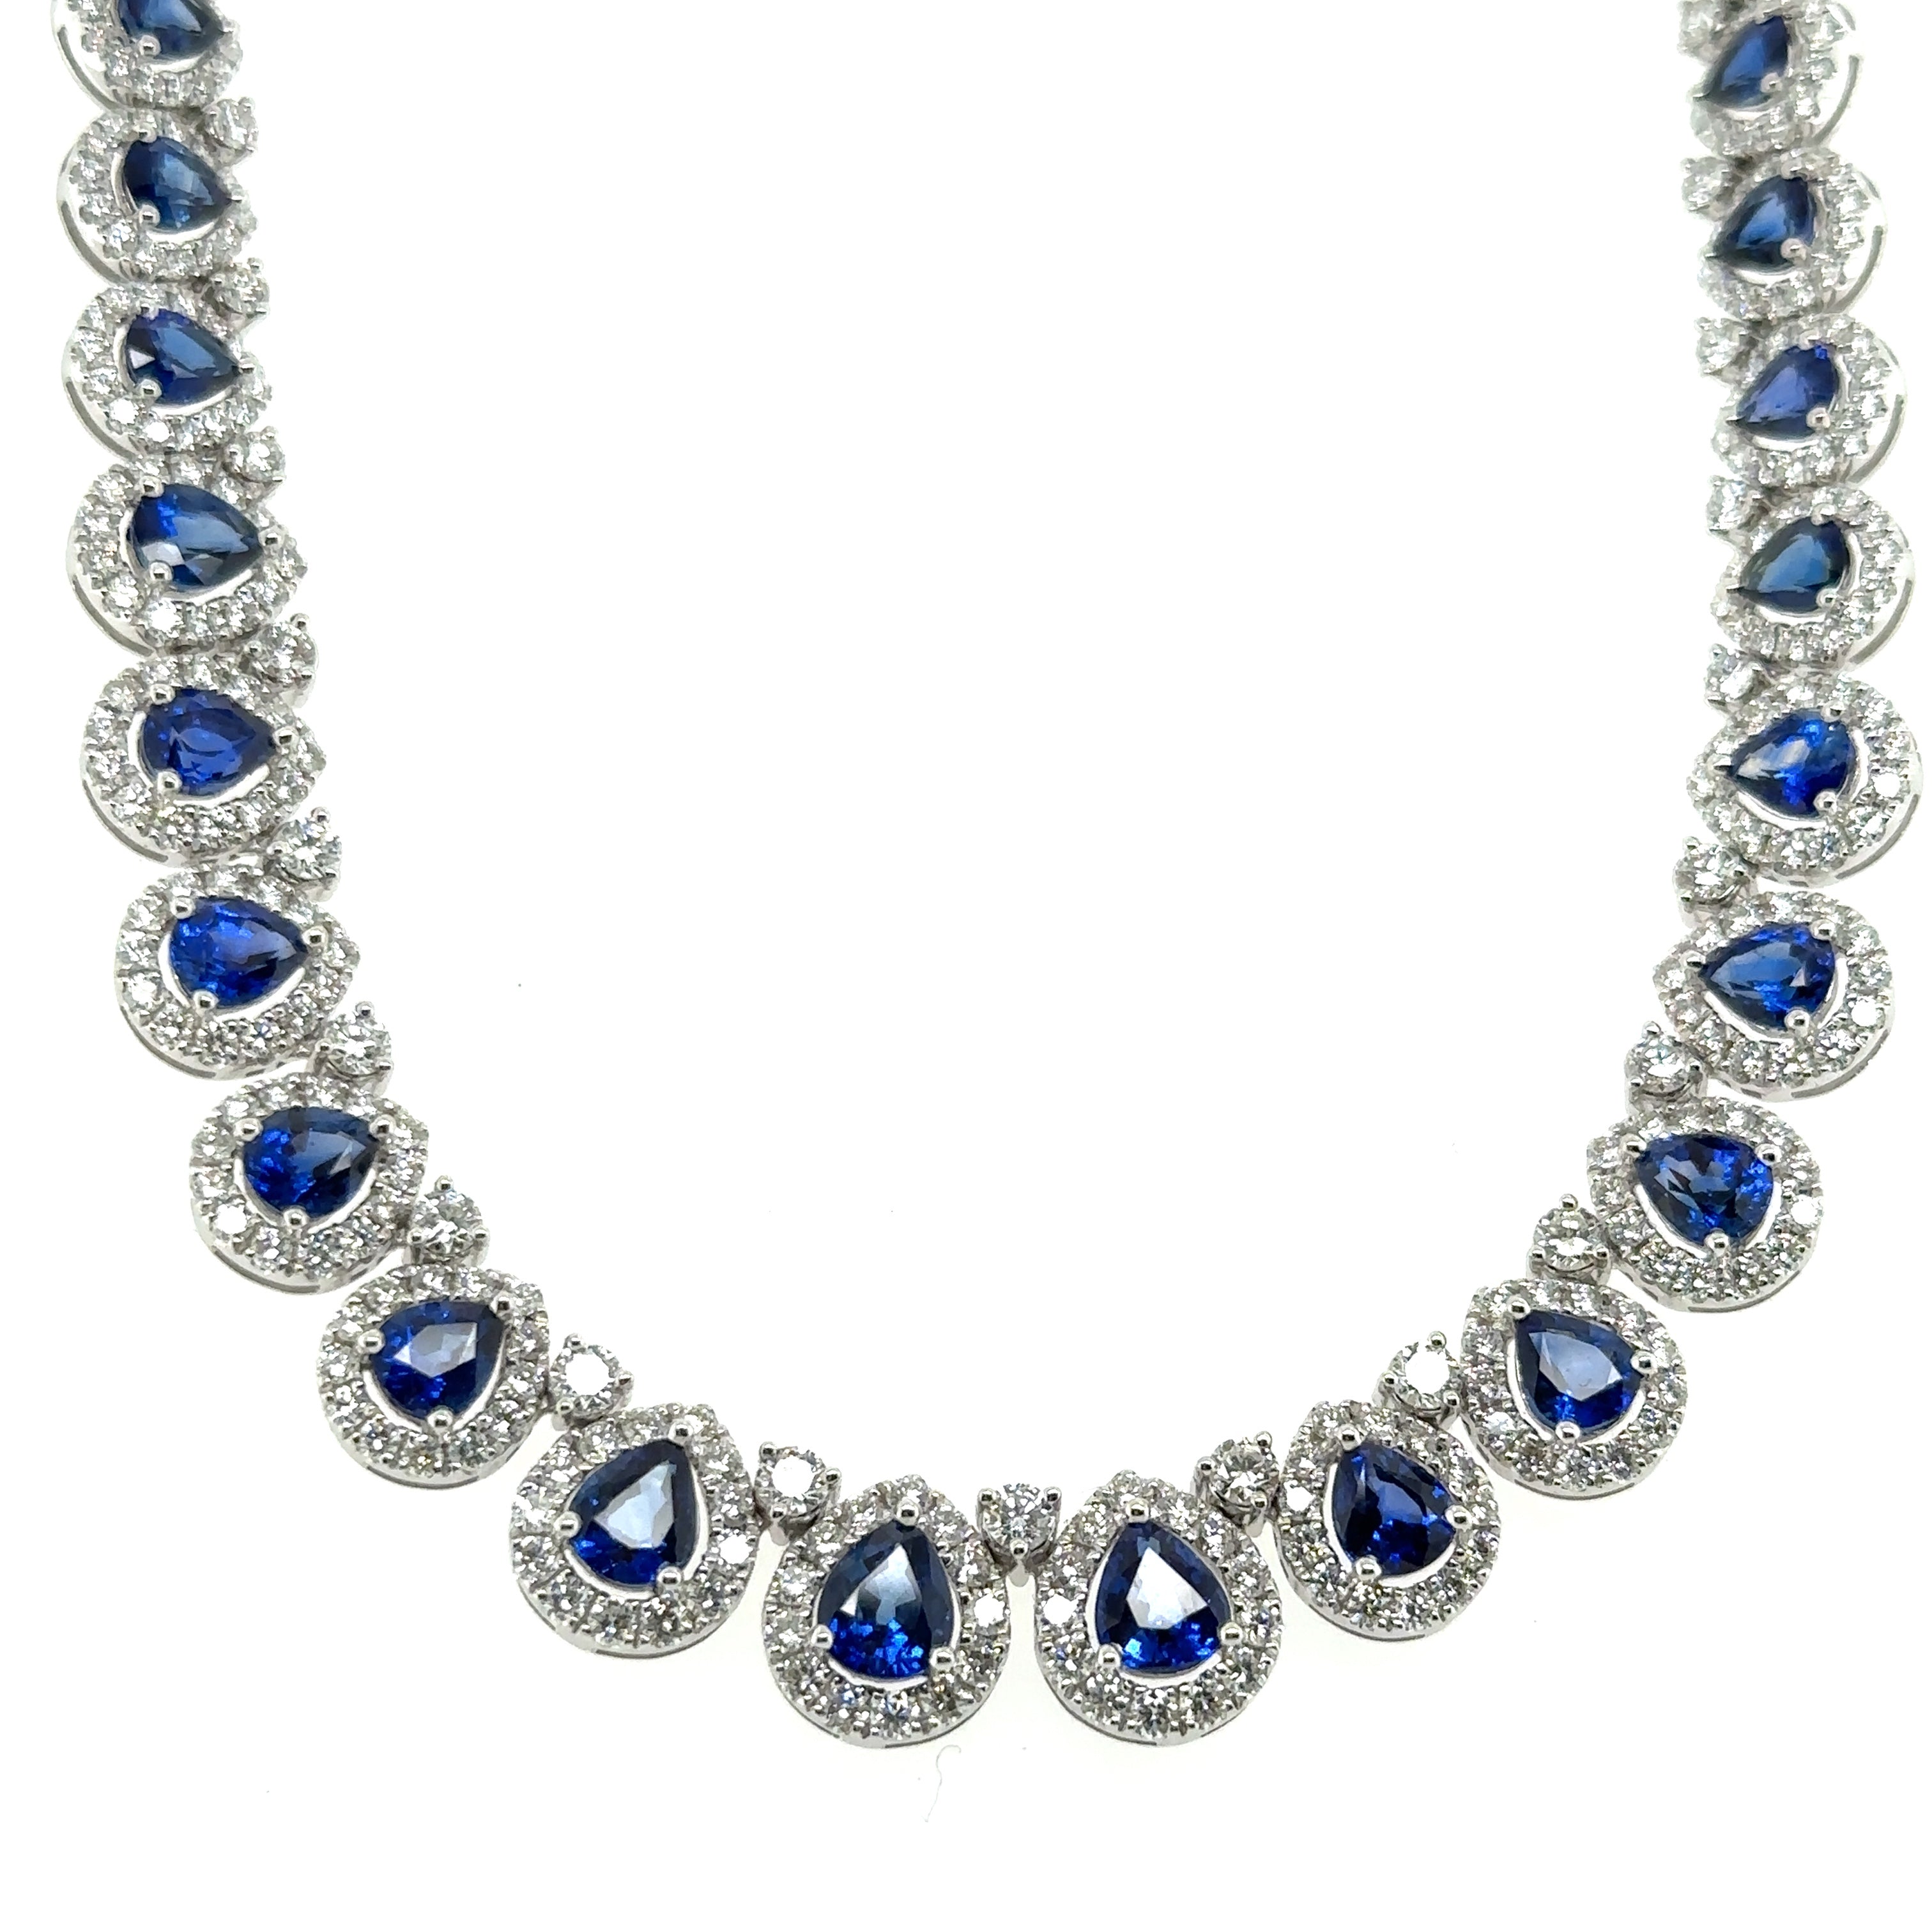 Copy of 27.65carat Pear shape Diamond and Royal Blue Sapphire Statement Necklace